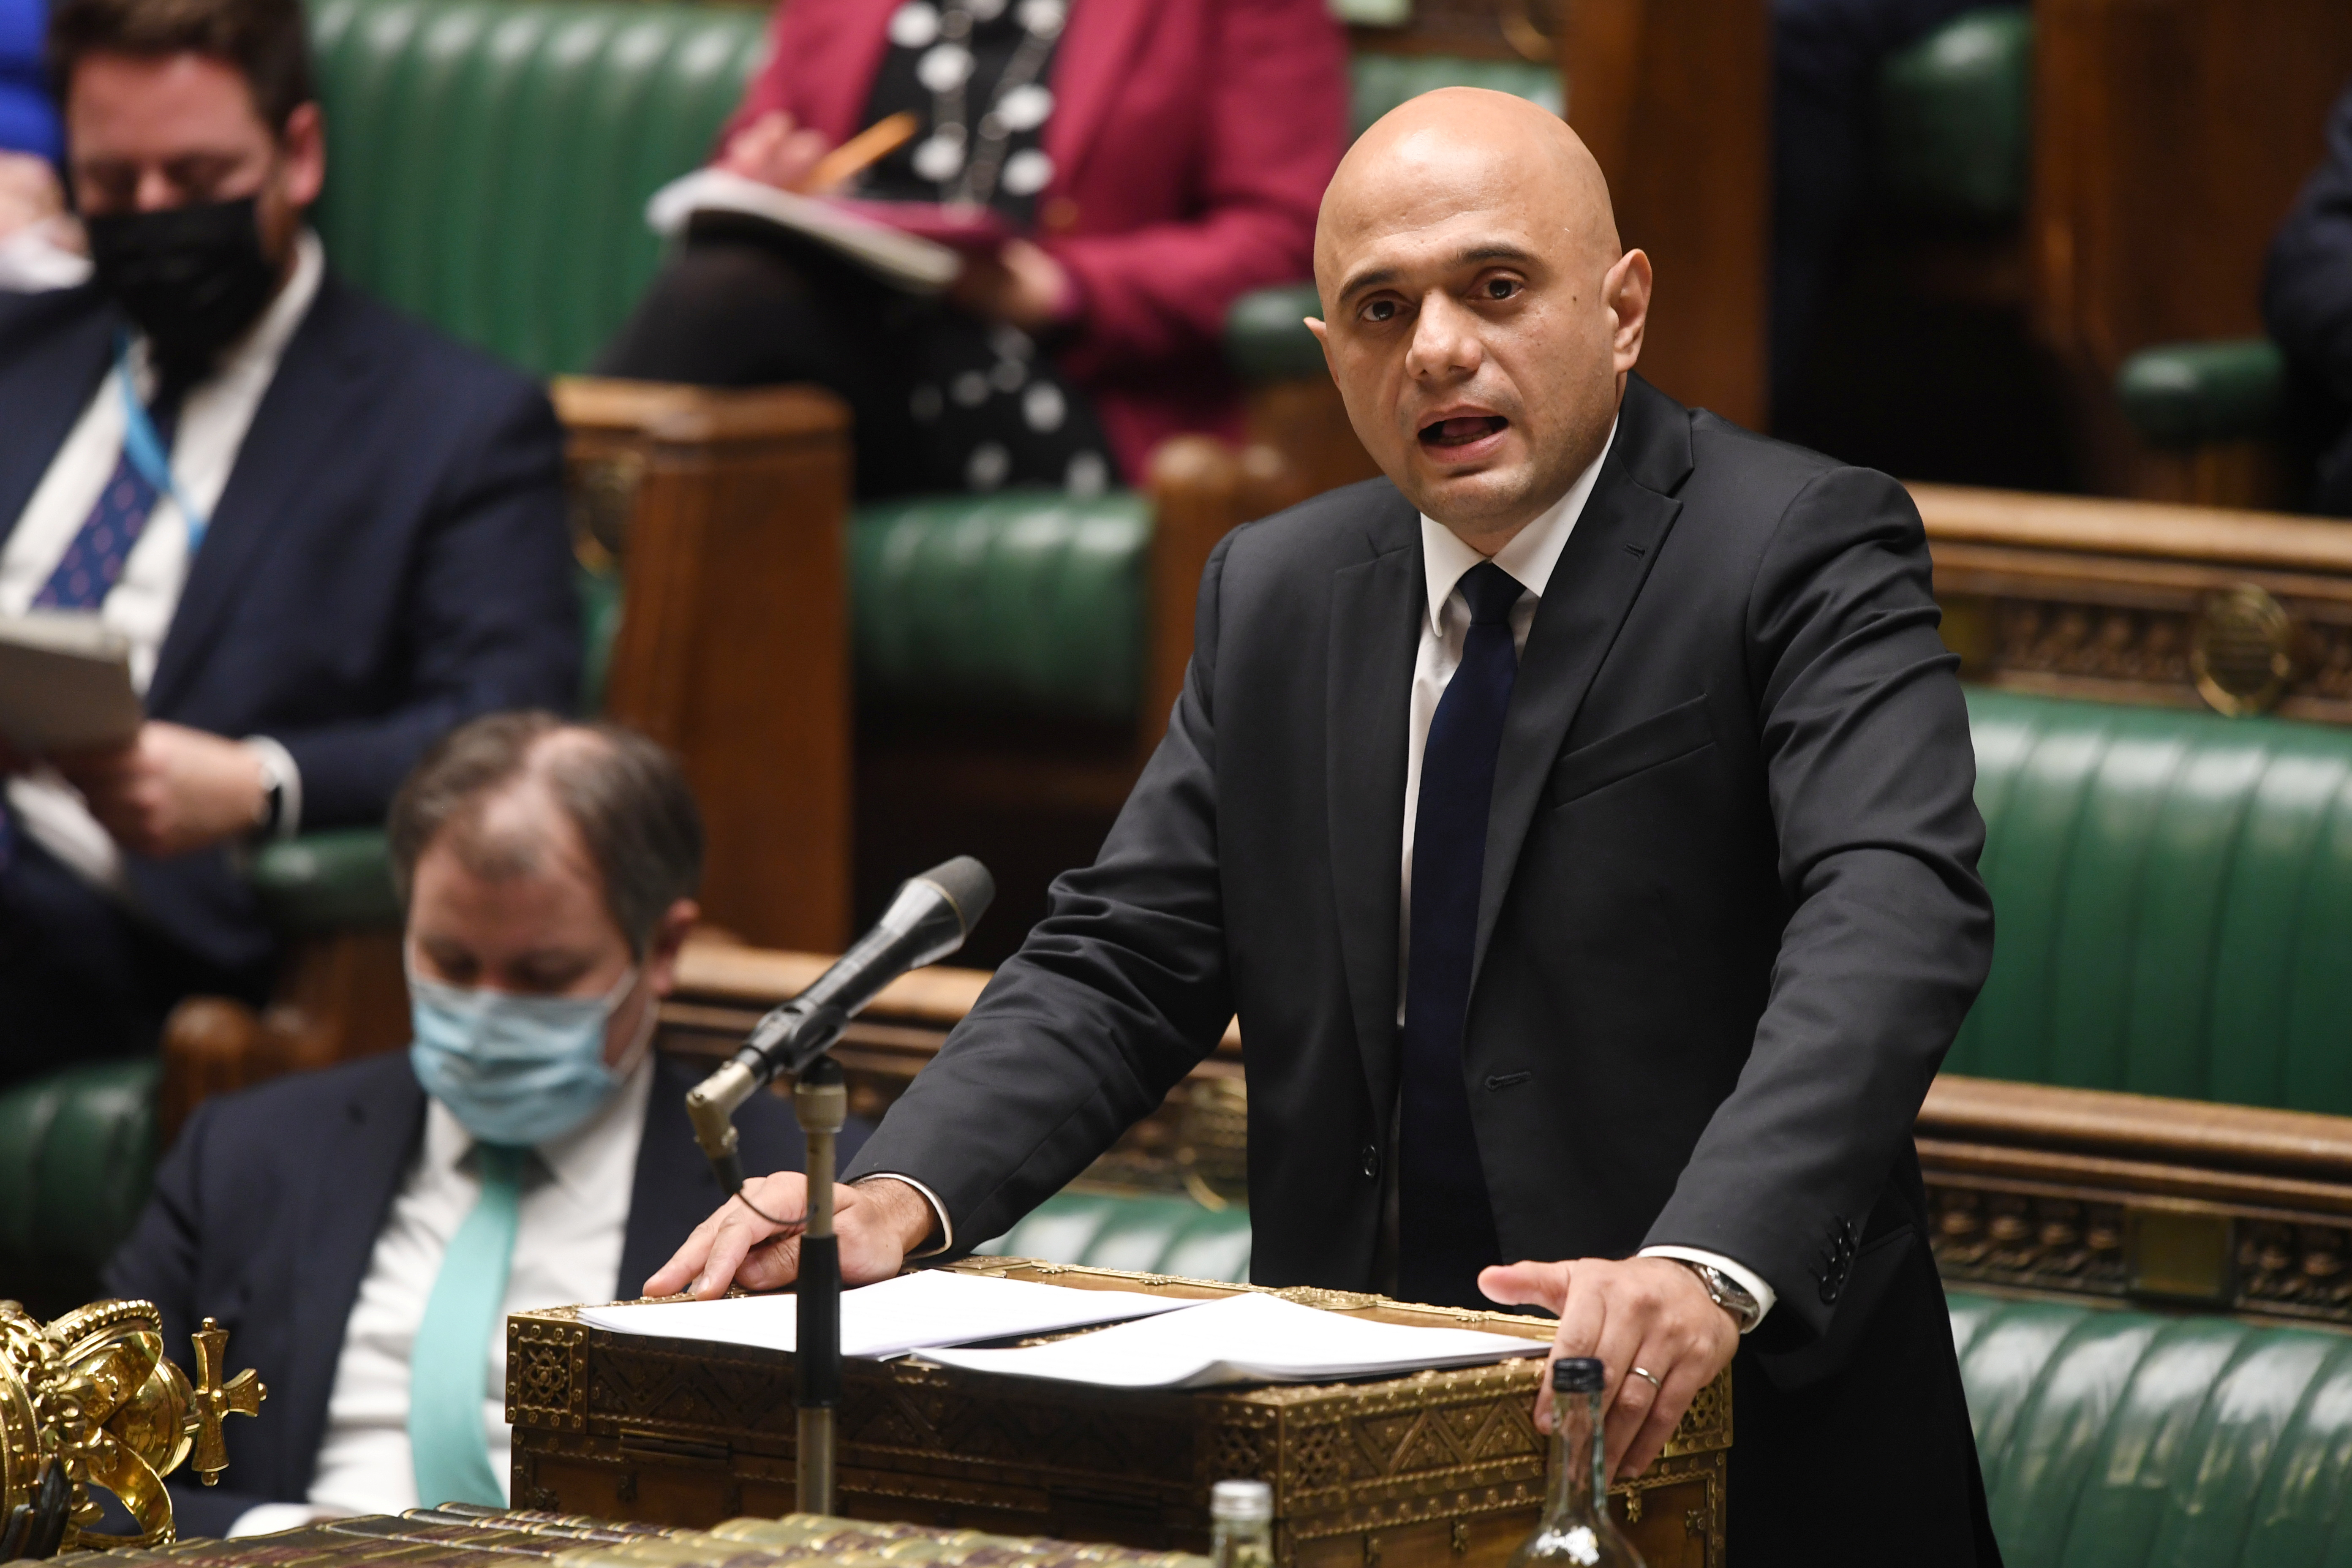 Britain's Health and Social Care Secretary Sajid Javid delivers COVID-19 situation update, at the House of Commons in London, Britain November 29, 2021